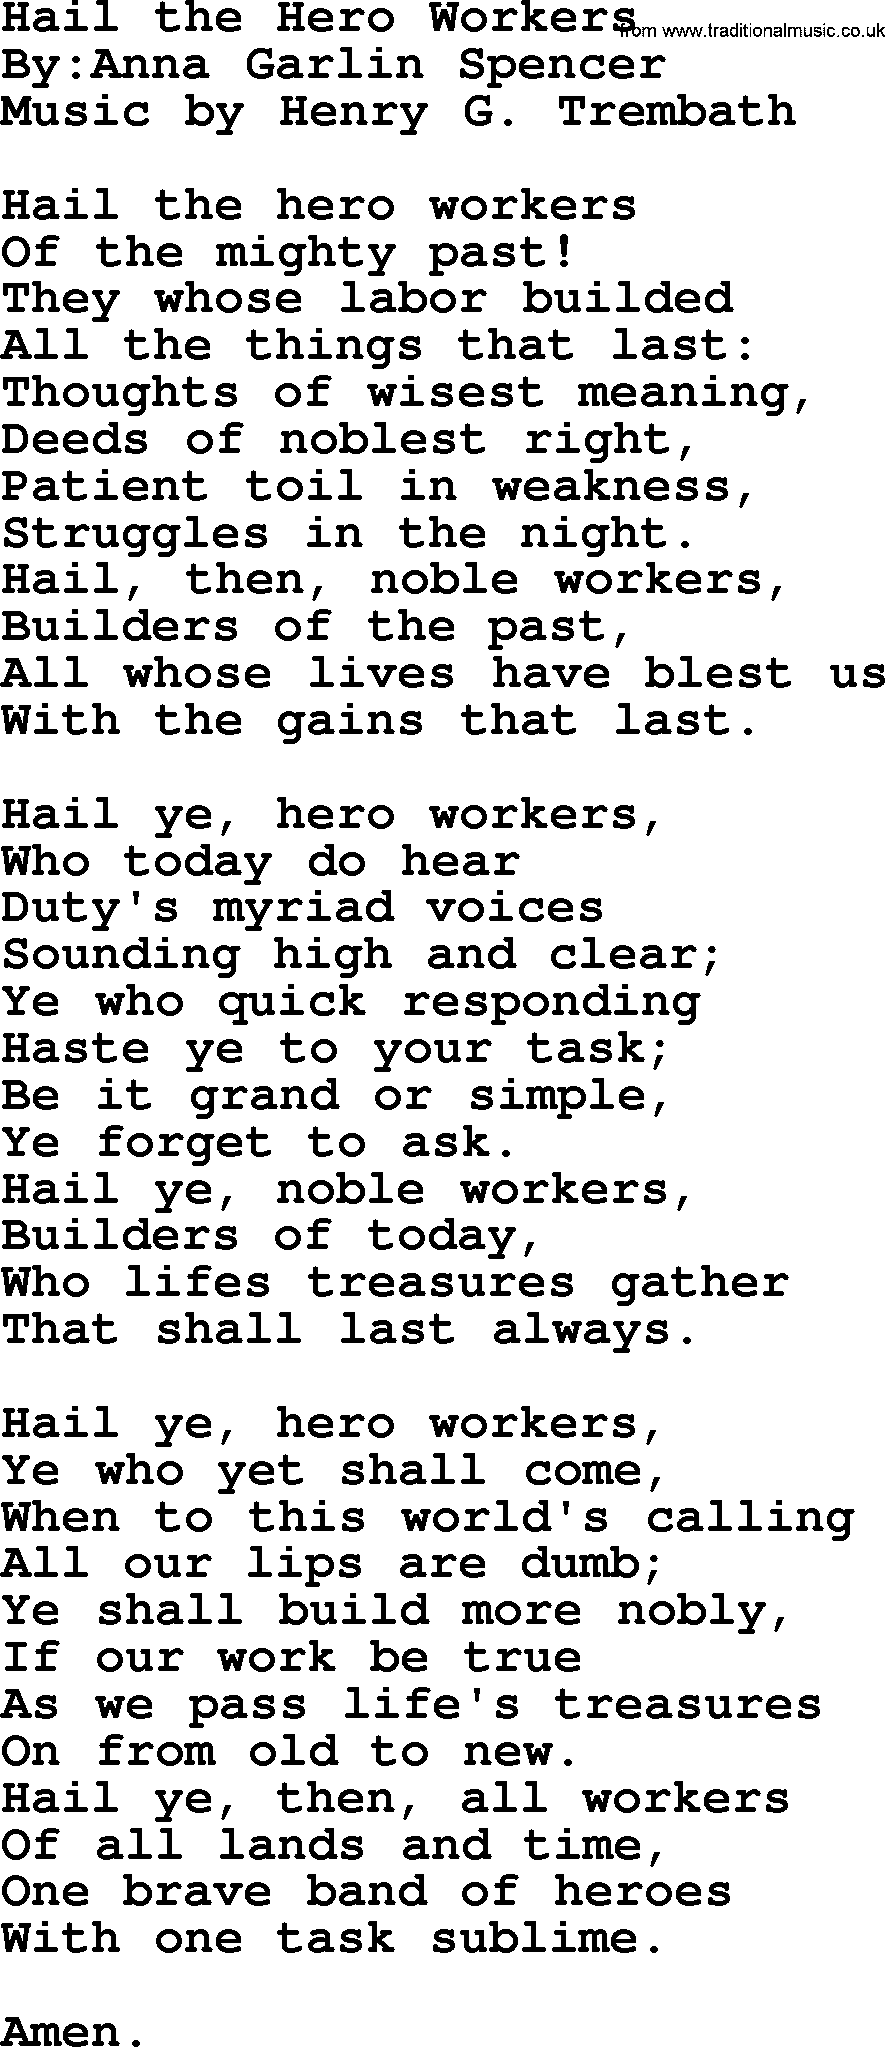 Political, Solidarity, Workers or Union song: Hail The Hero Workers, lyrics